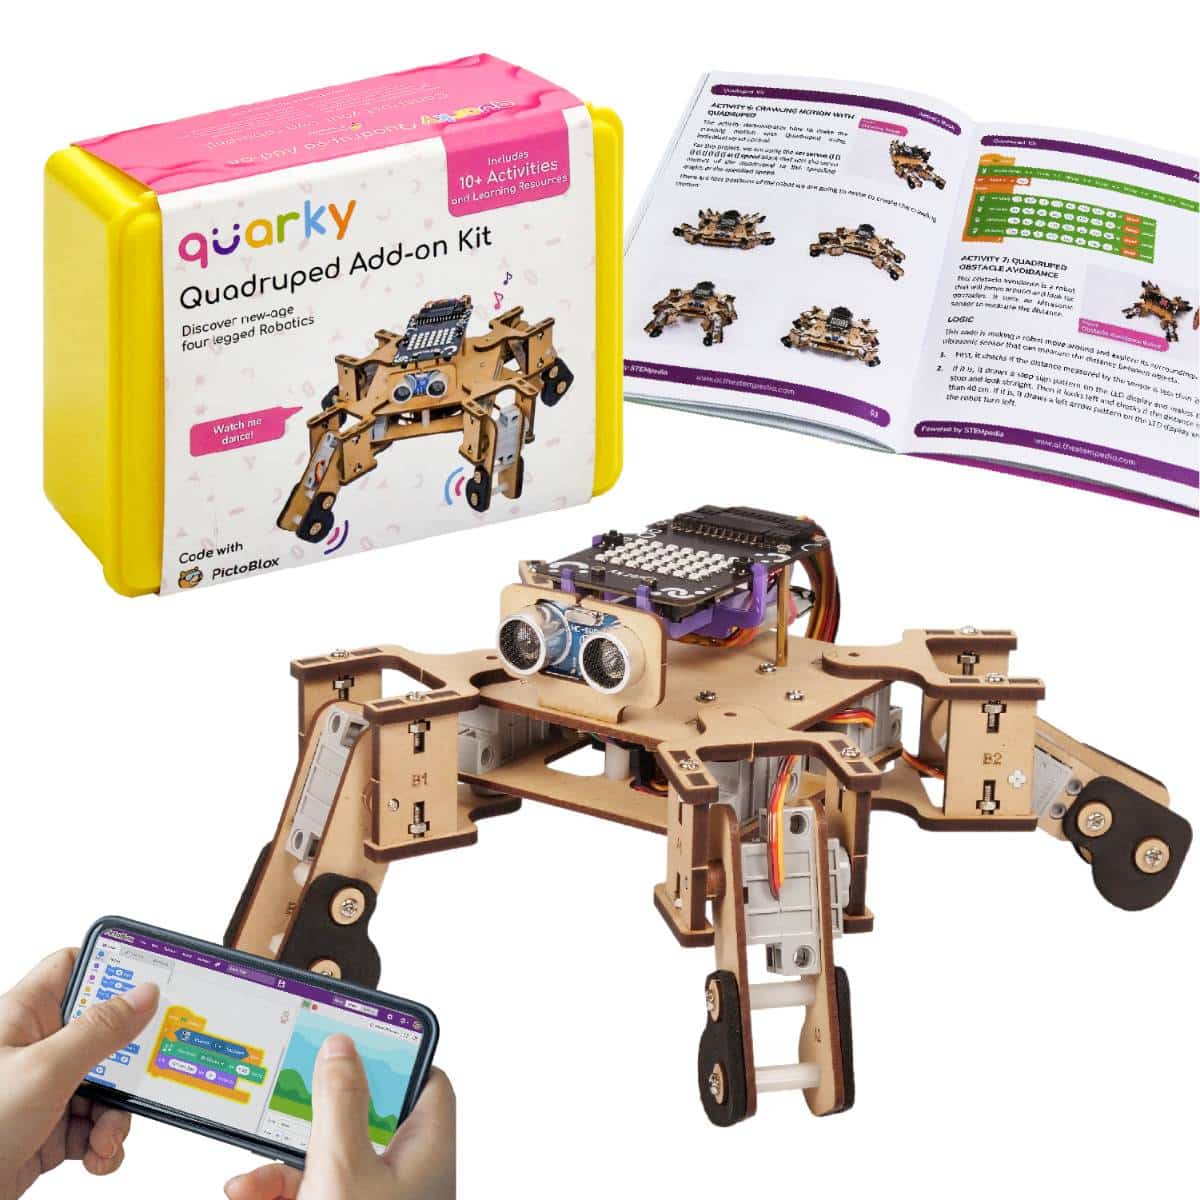 Four-legged Quarky Quadruped robot controlled by a smartphone app named PictoBlox